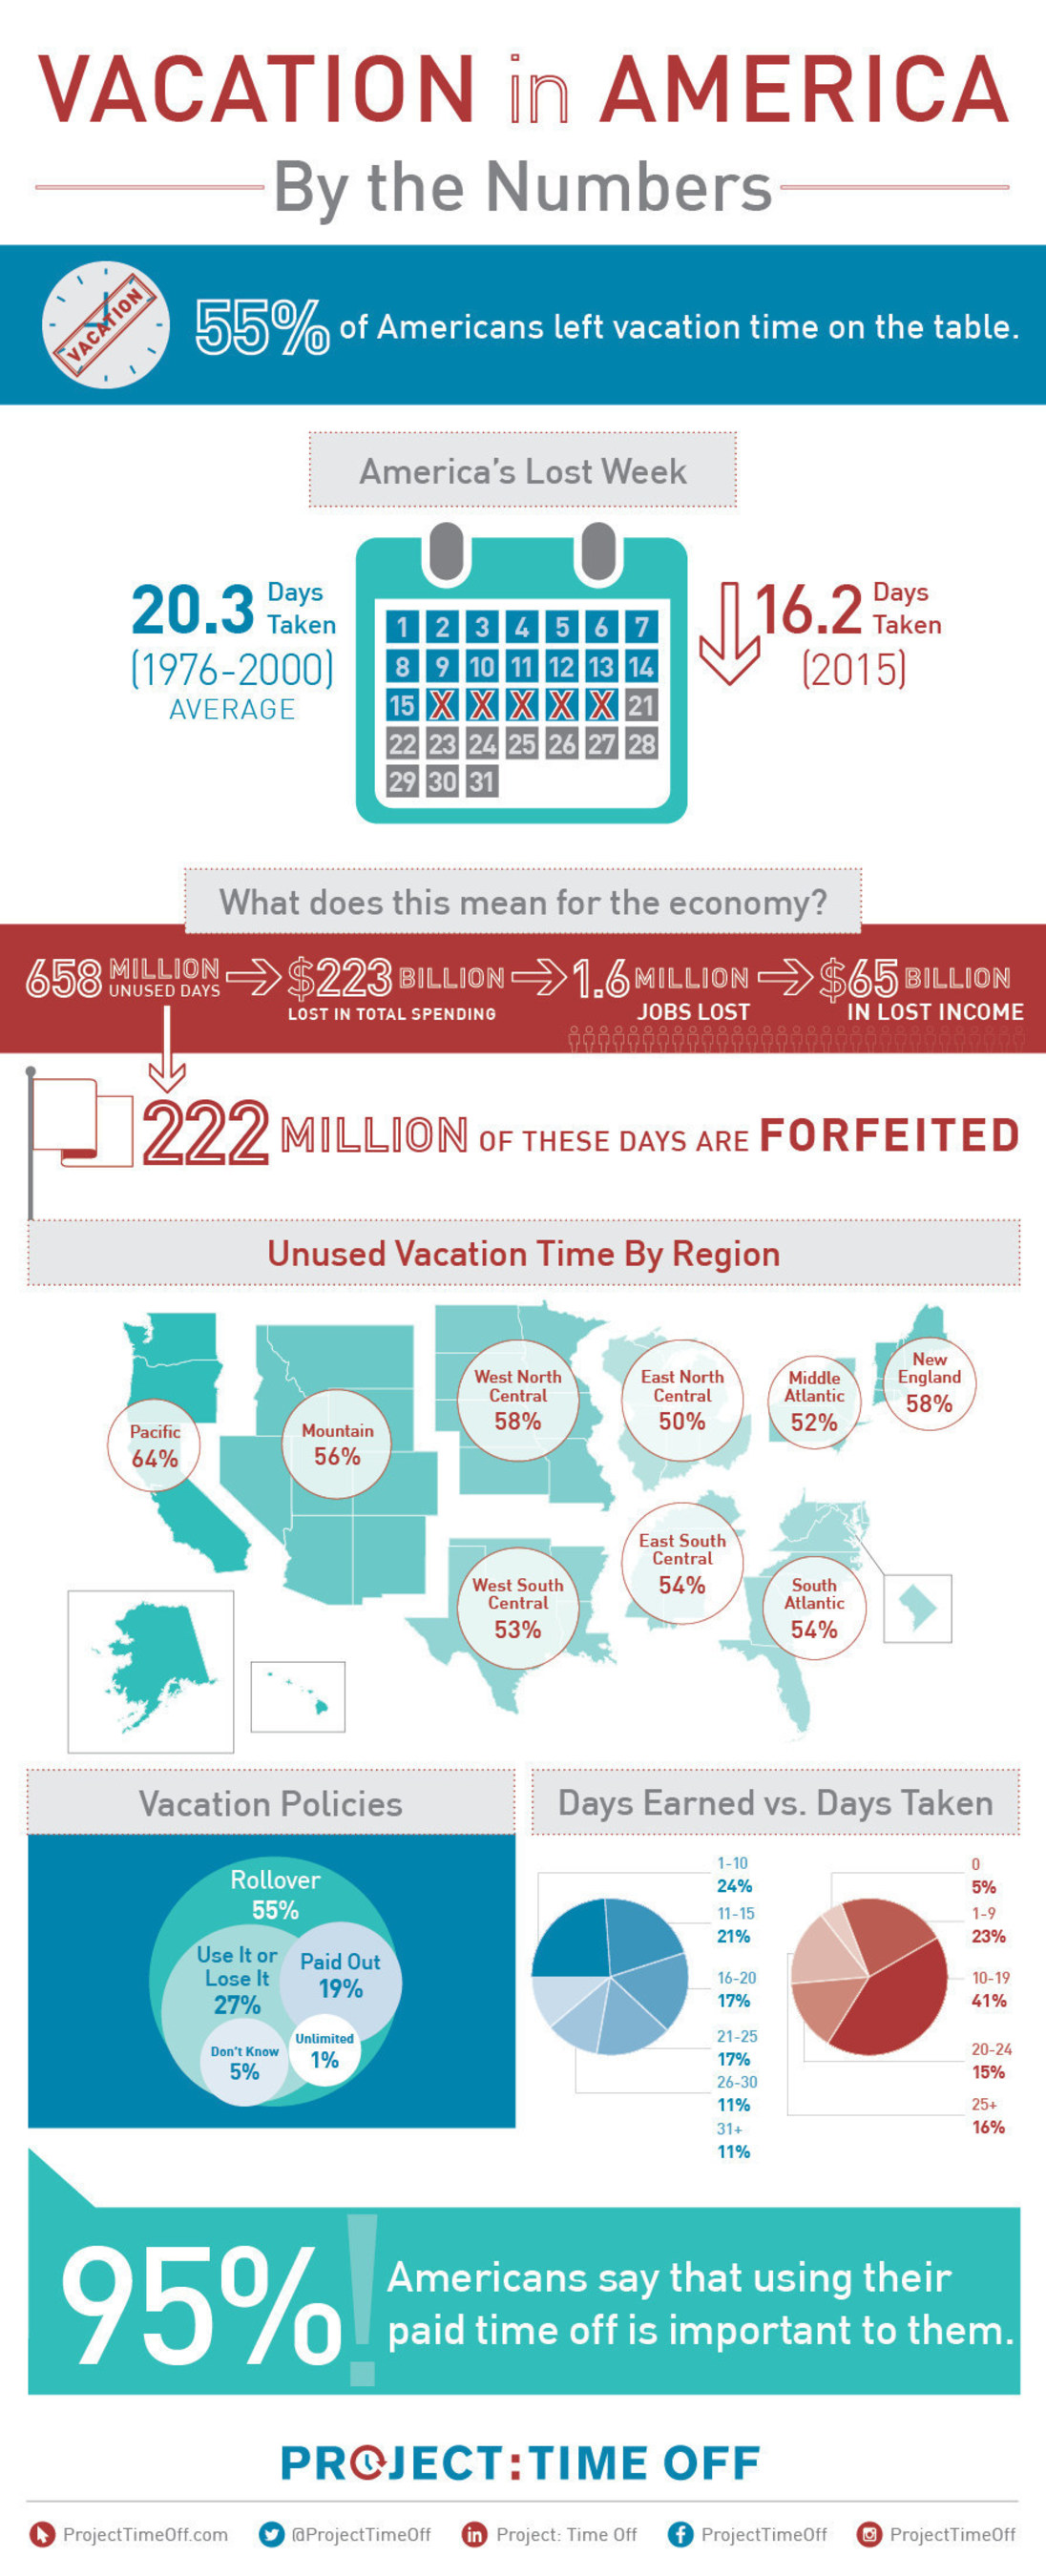 America's time off habits, or lack thereof, have resulted in a record-setting waste of 658 million vacation days. More than half of American workers (55%) left vacation time unused in 2015 and forfeited a total of 222 million days. In this infographic, Project: Time Off demonstrates the trend of work martyrdom and the recent phenomenon of Americans skipping vacation.